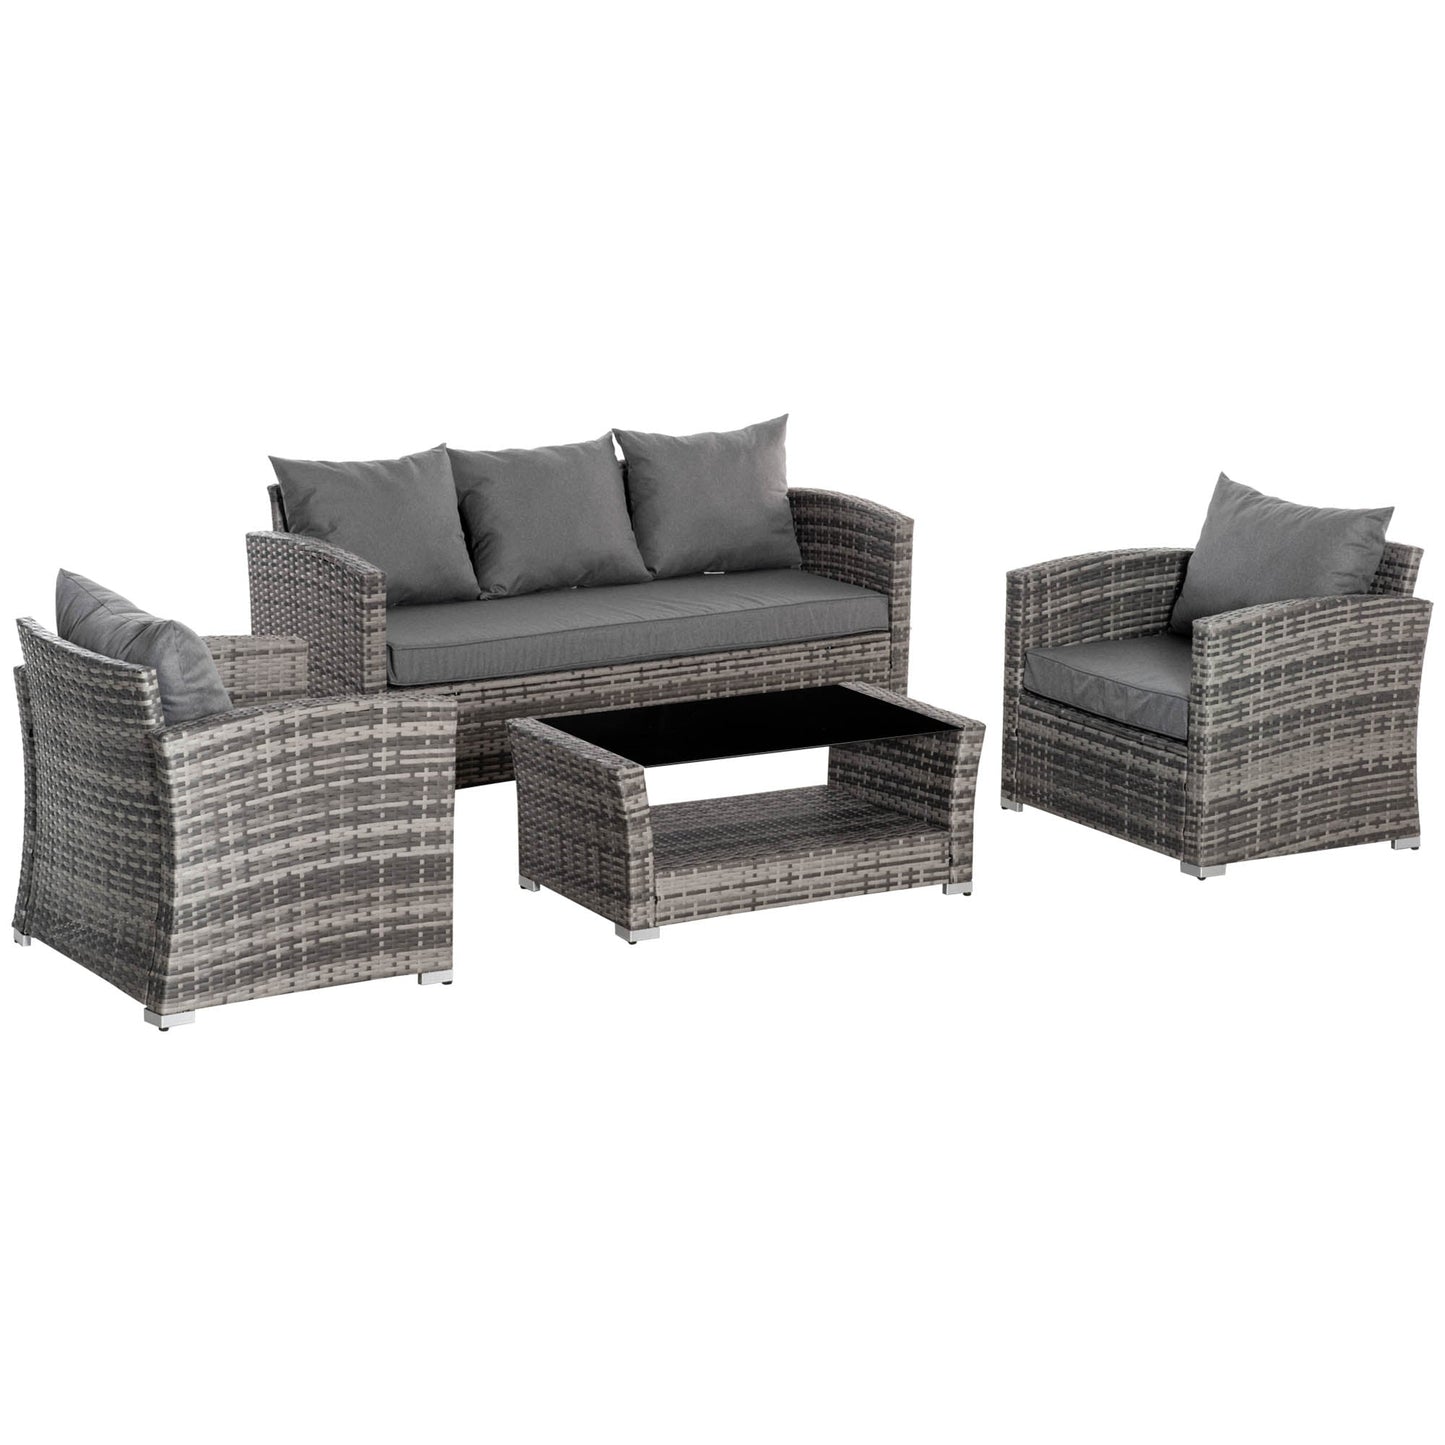 Outsunny set garden living room in Rattan PE with 3 -seater sofa, 2 armchairs and table with glass, Grey